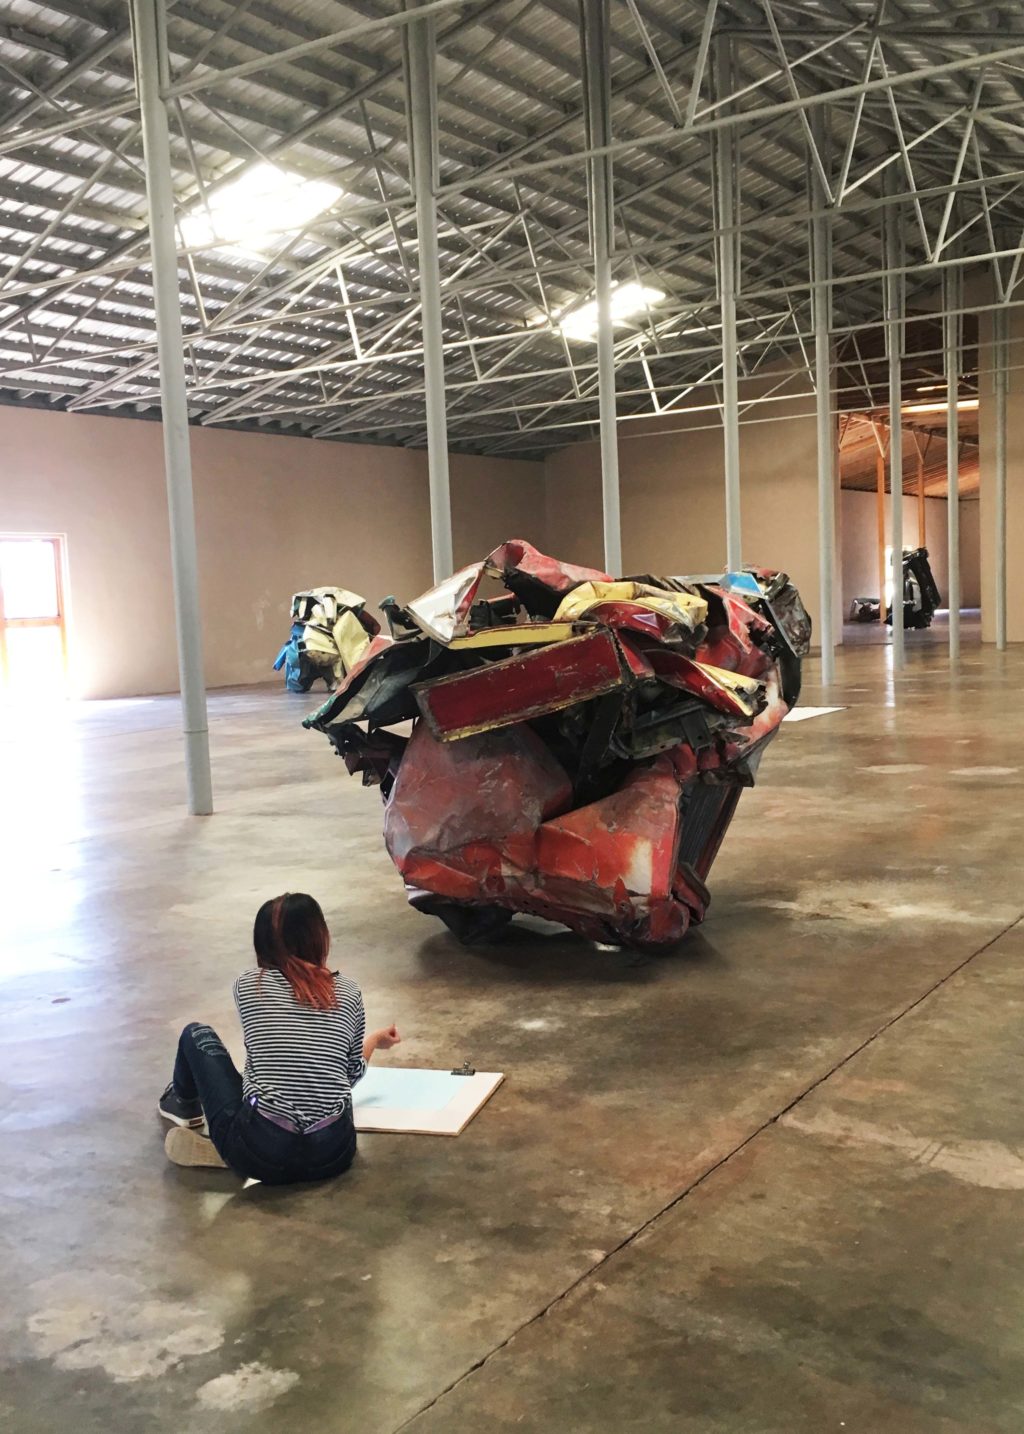 Young artist sketching in the Chamberlain installation